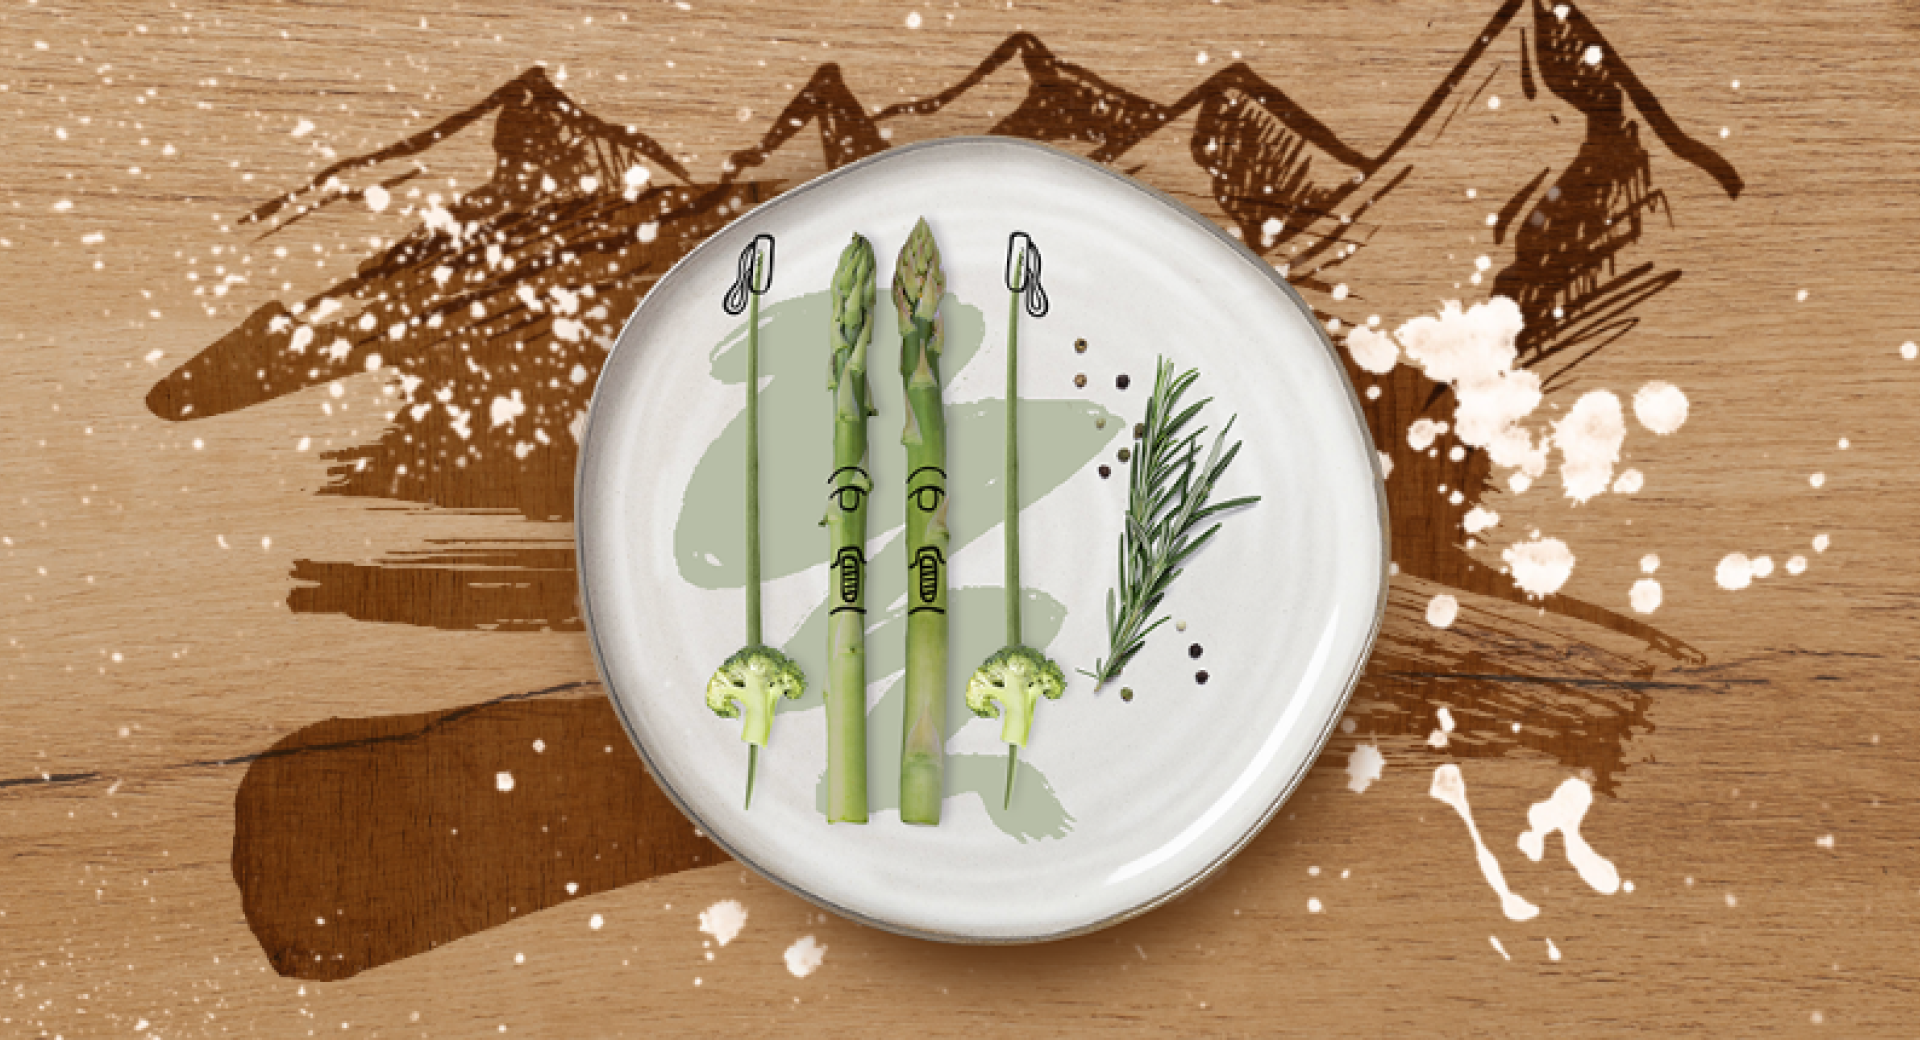 Asparagus on a white plate, background brown with a mountain illustration.